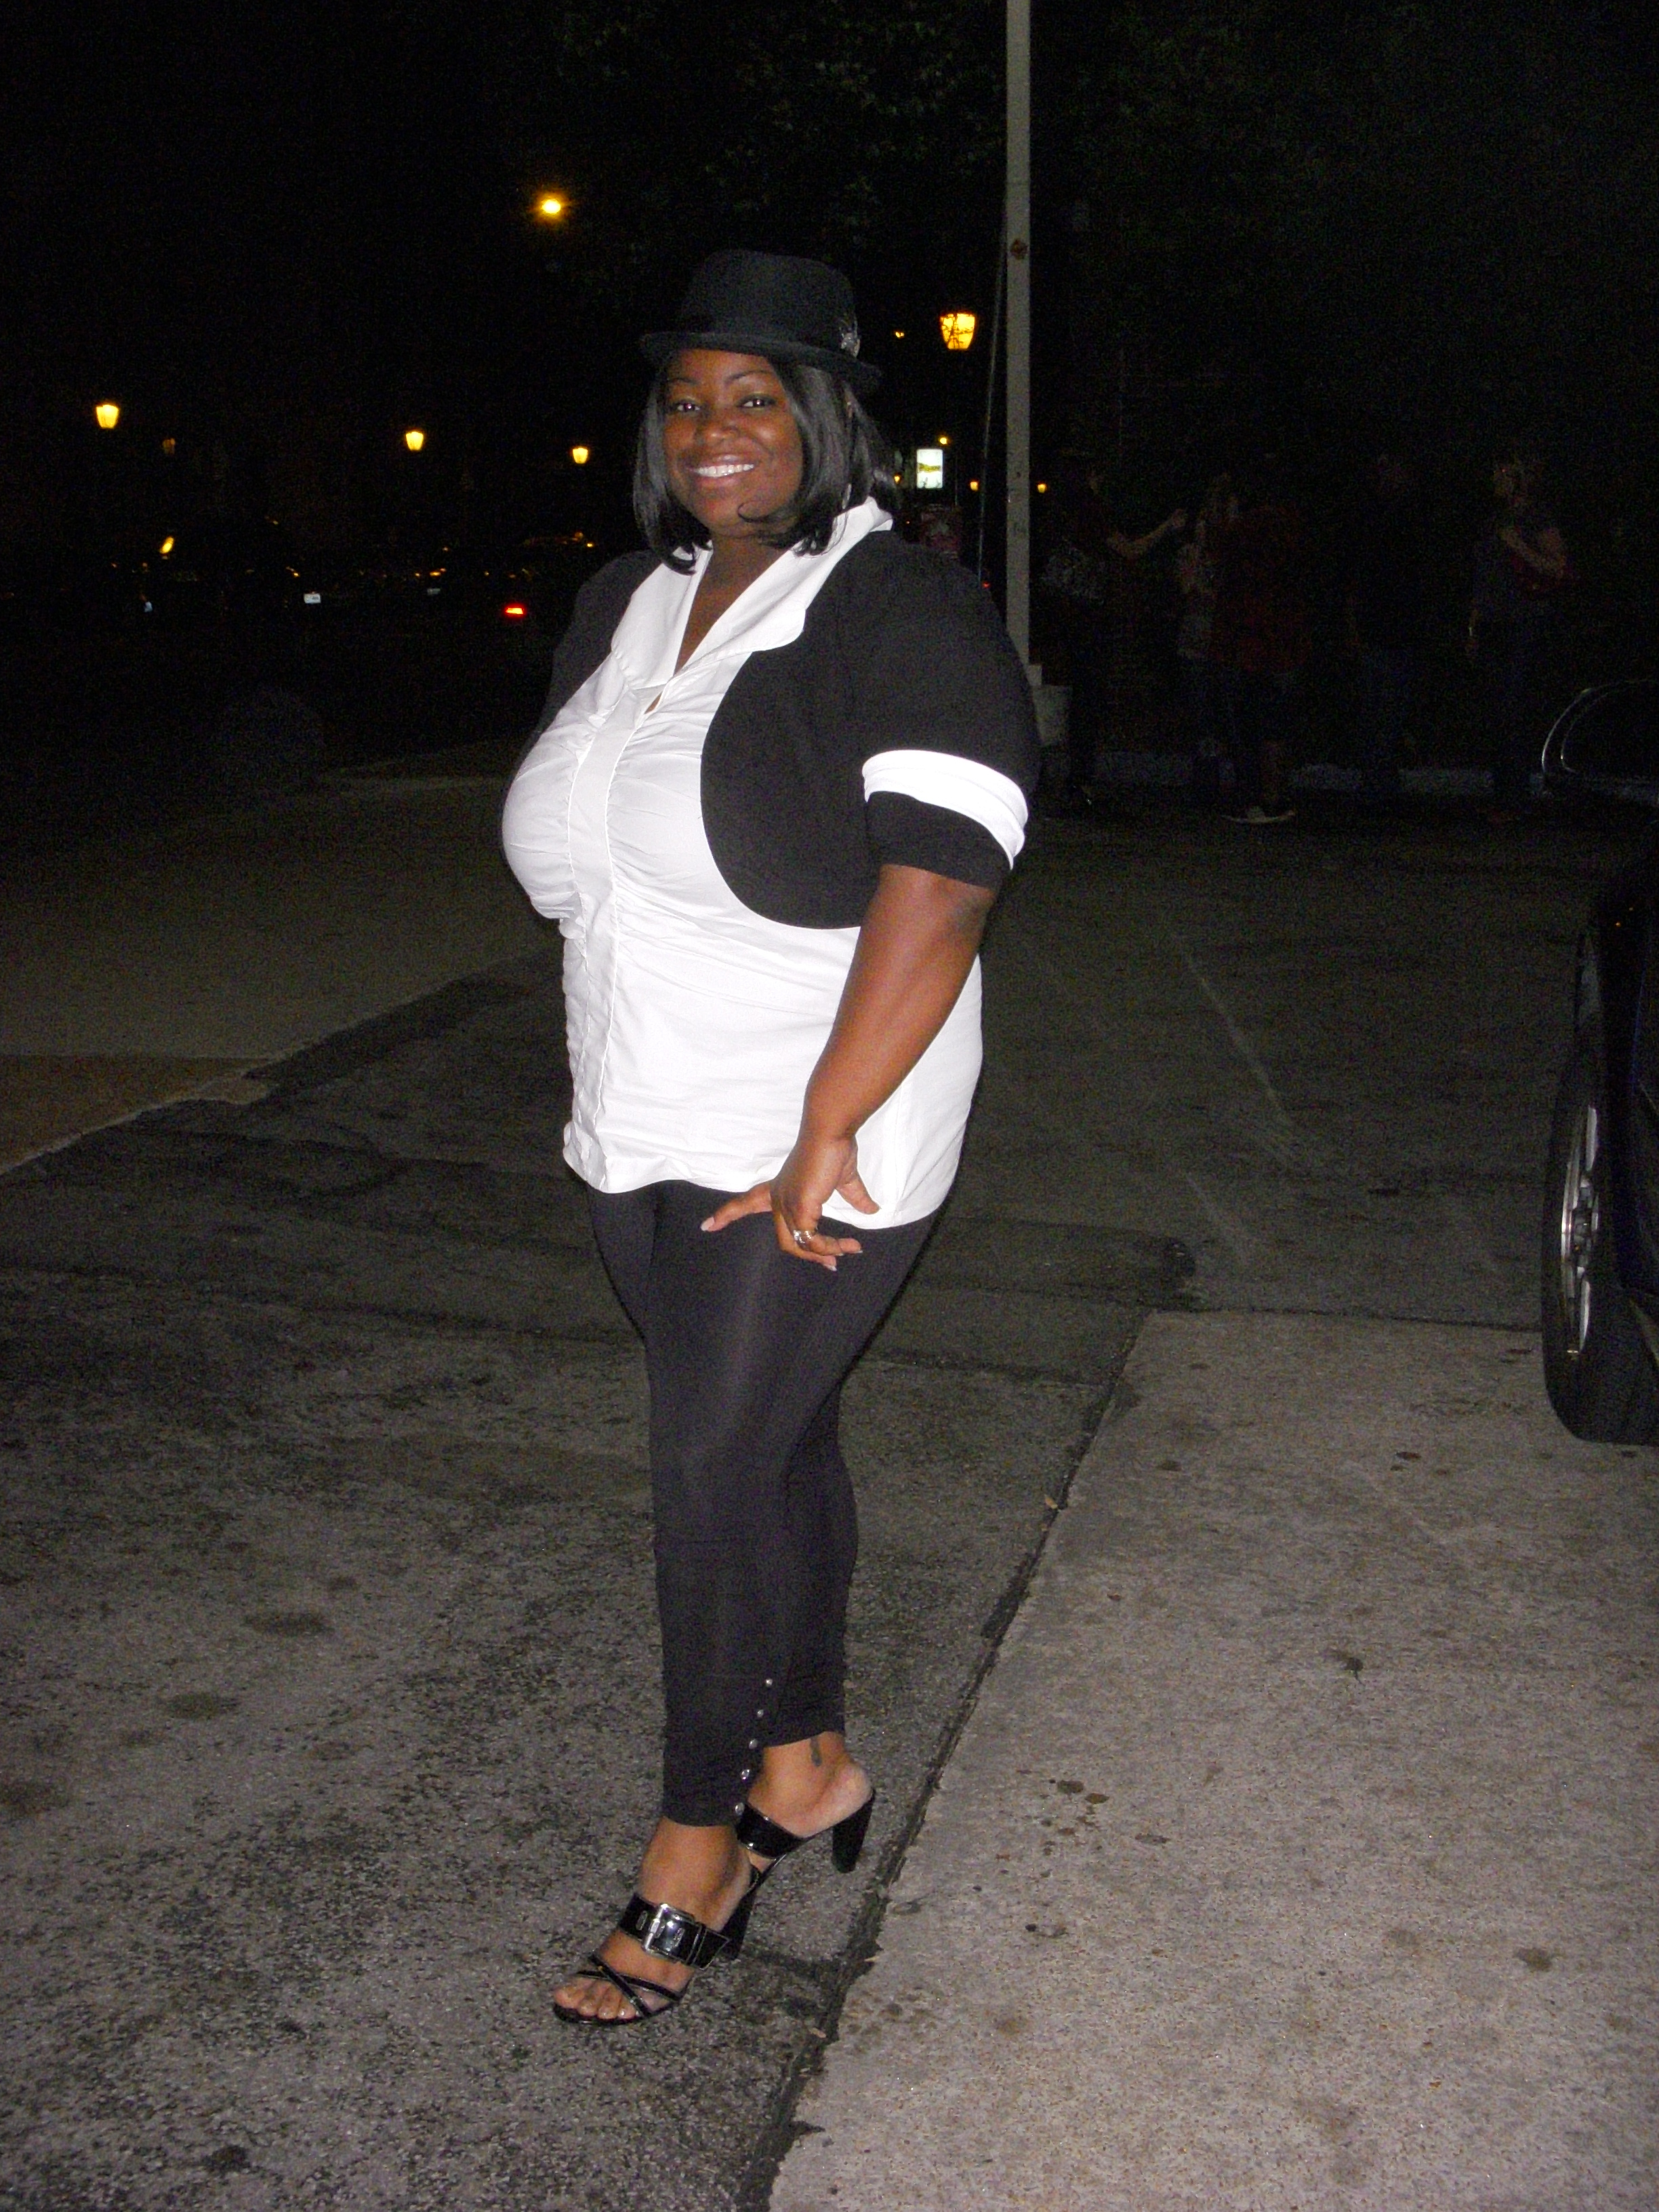 MJ Party Pic Of Me